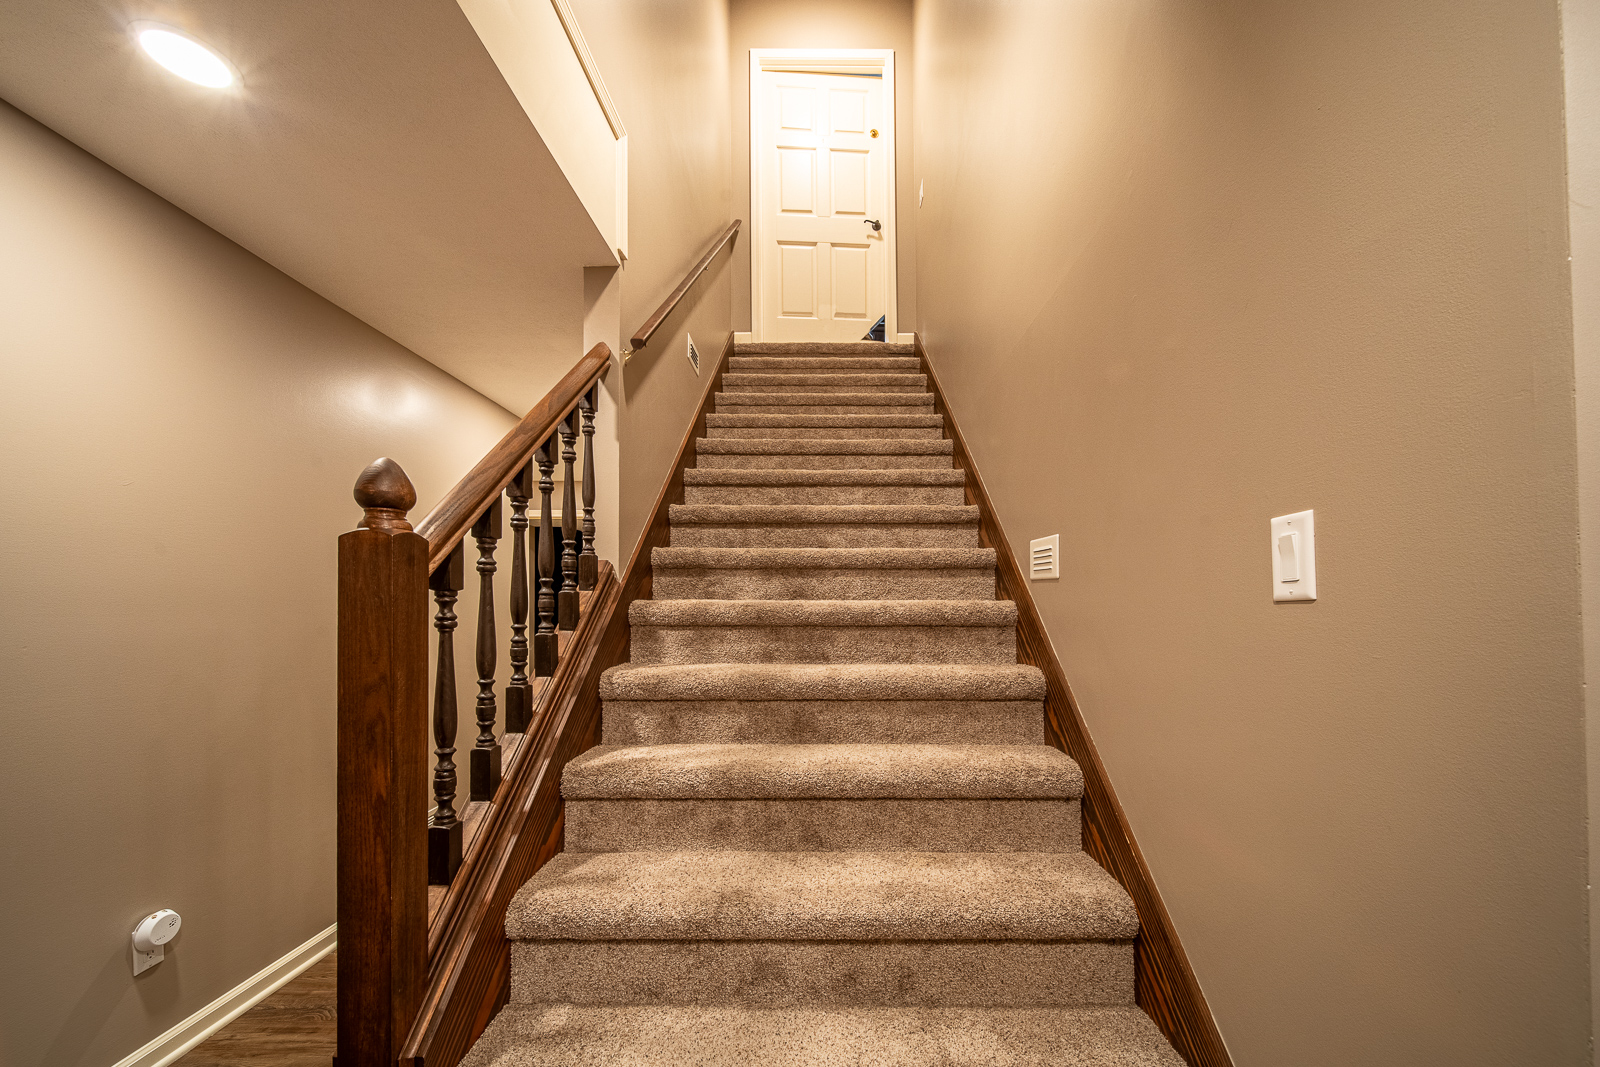 Graceful stairs with wood railing in the remodeled basement on Ripple Creek Drive.